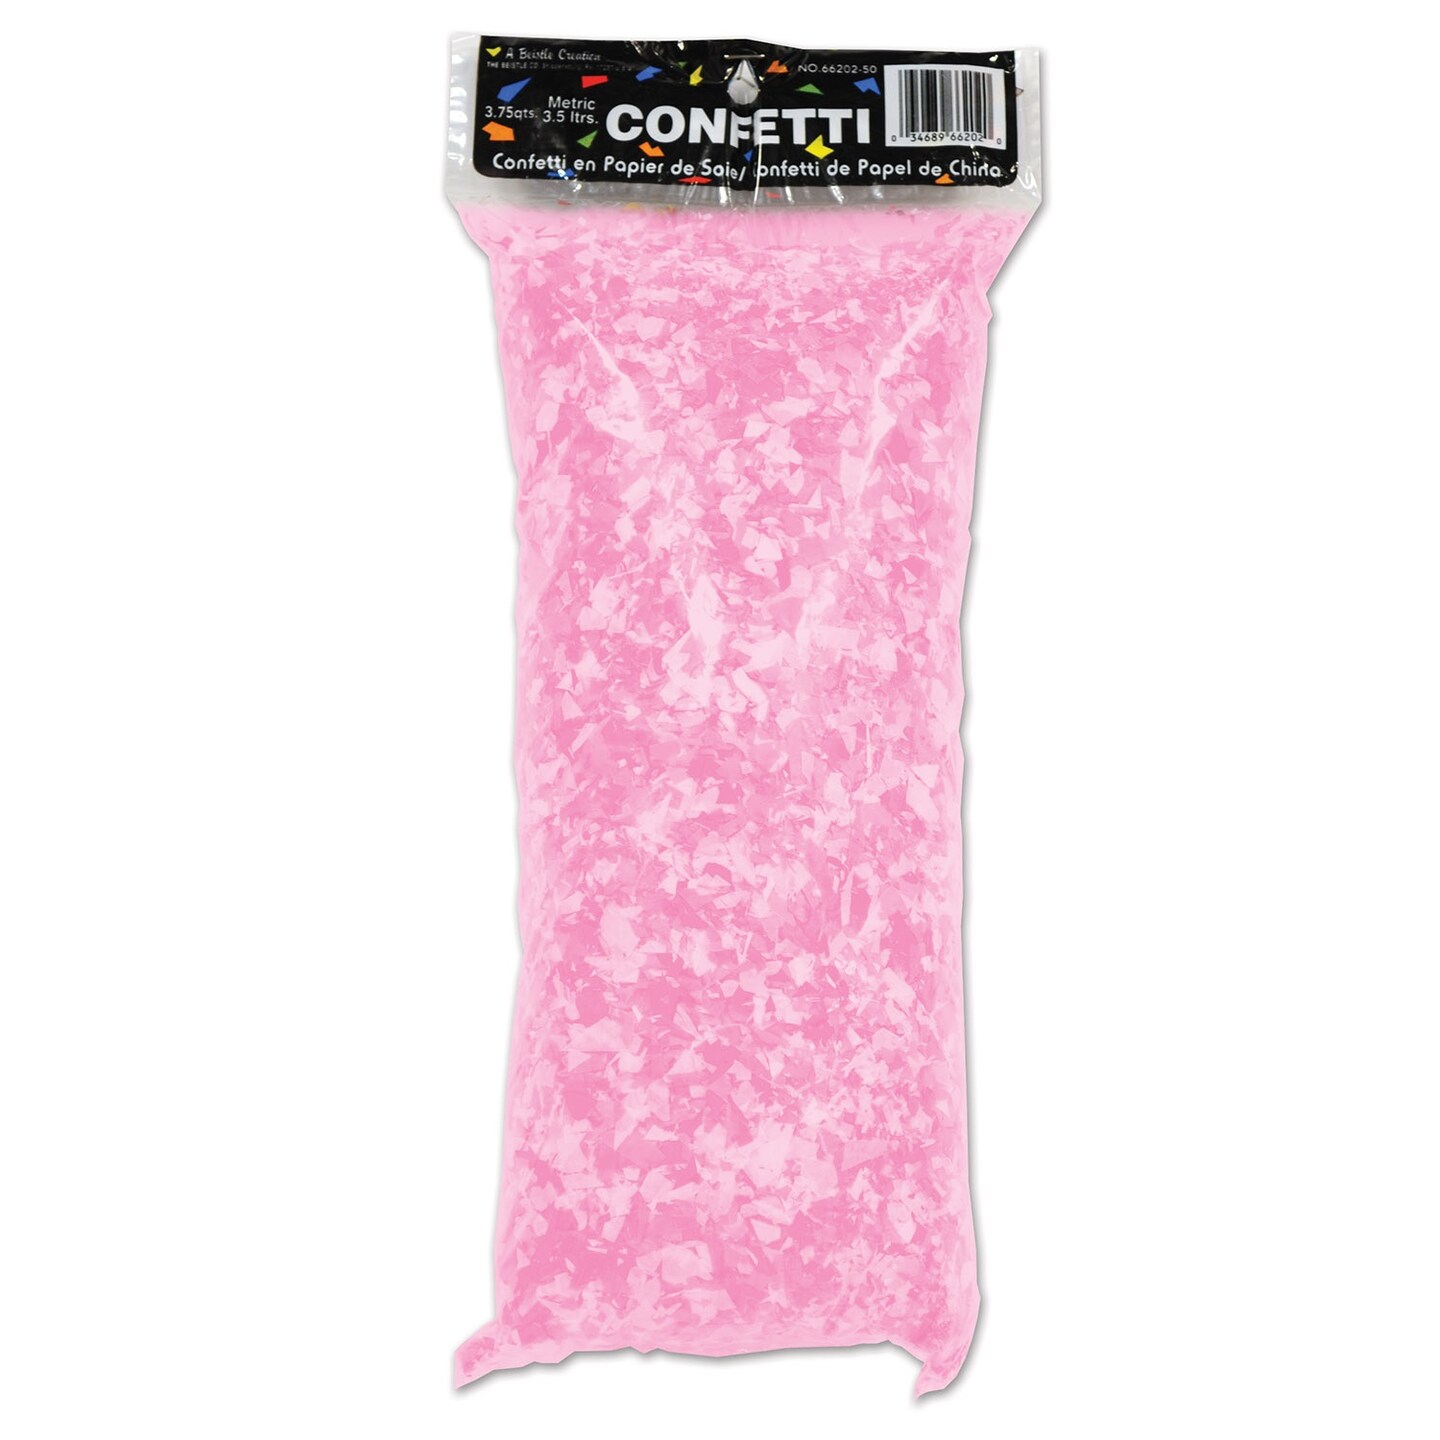 Beistle Pack of 6 Pink Tissue Paper Confetti Bags 3.75qt